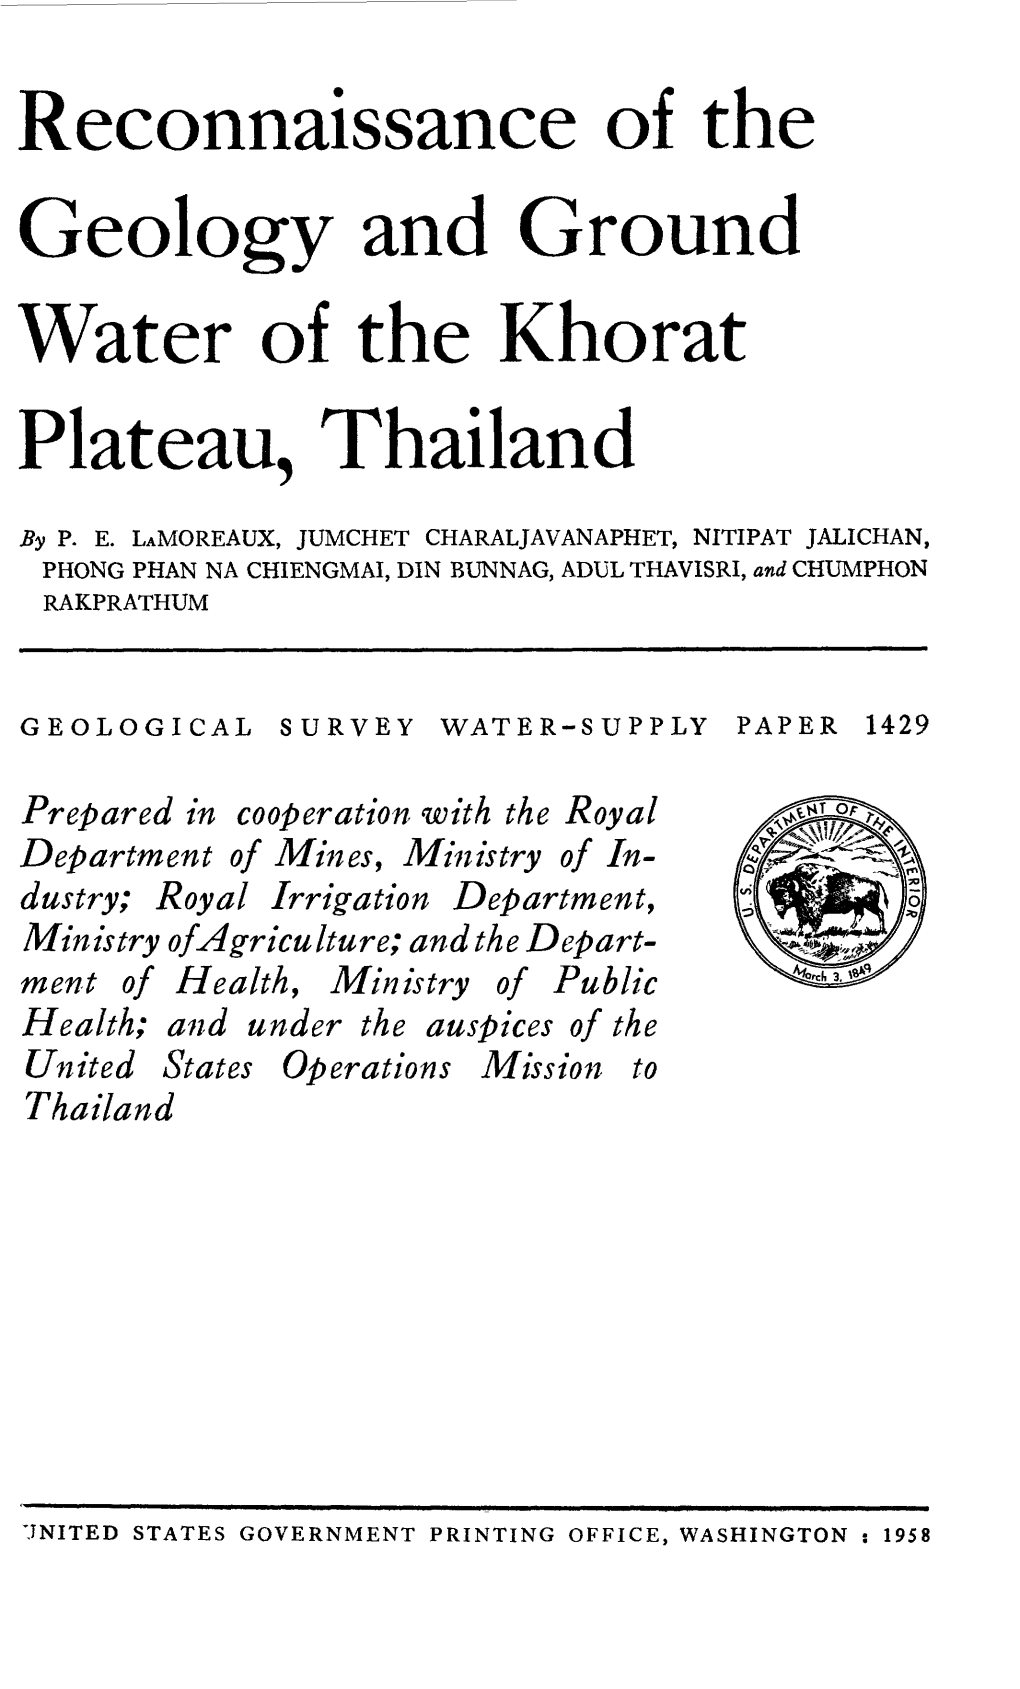 Reconnaissance of the Geology and Ground Water of the Khorat Plateau, Thailand by P